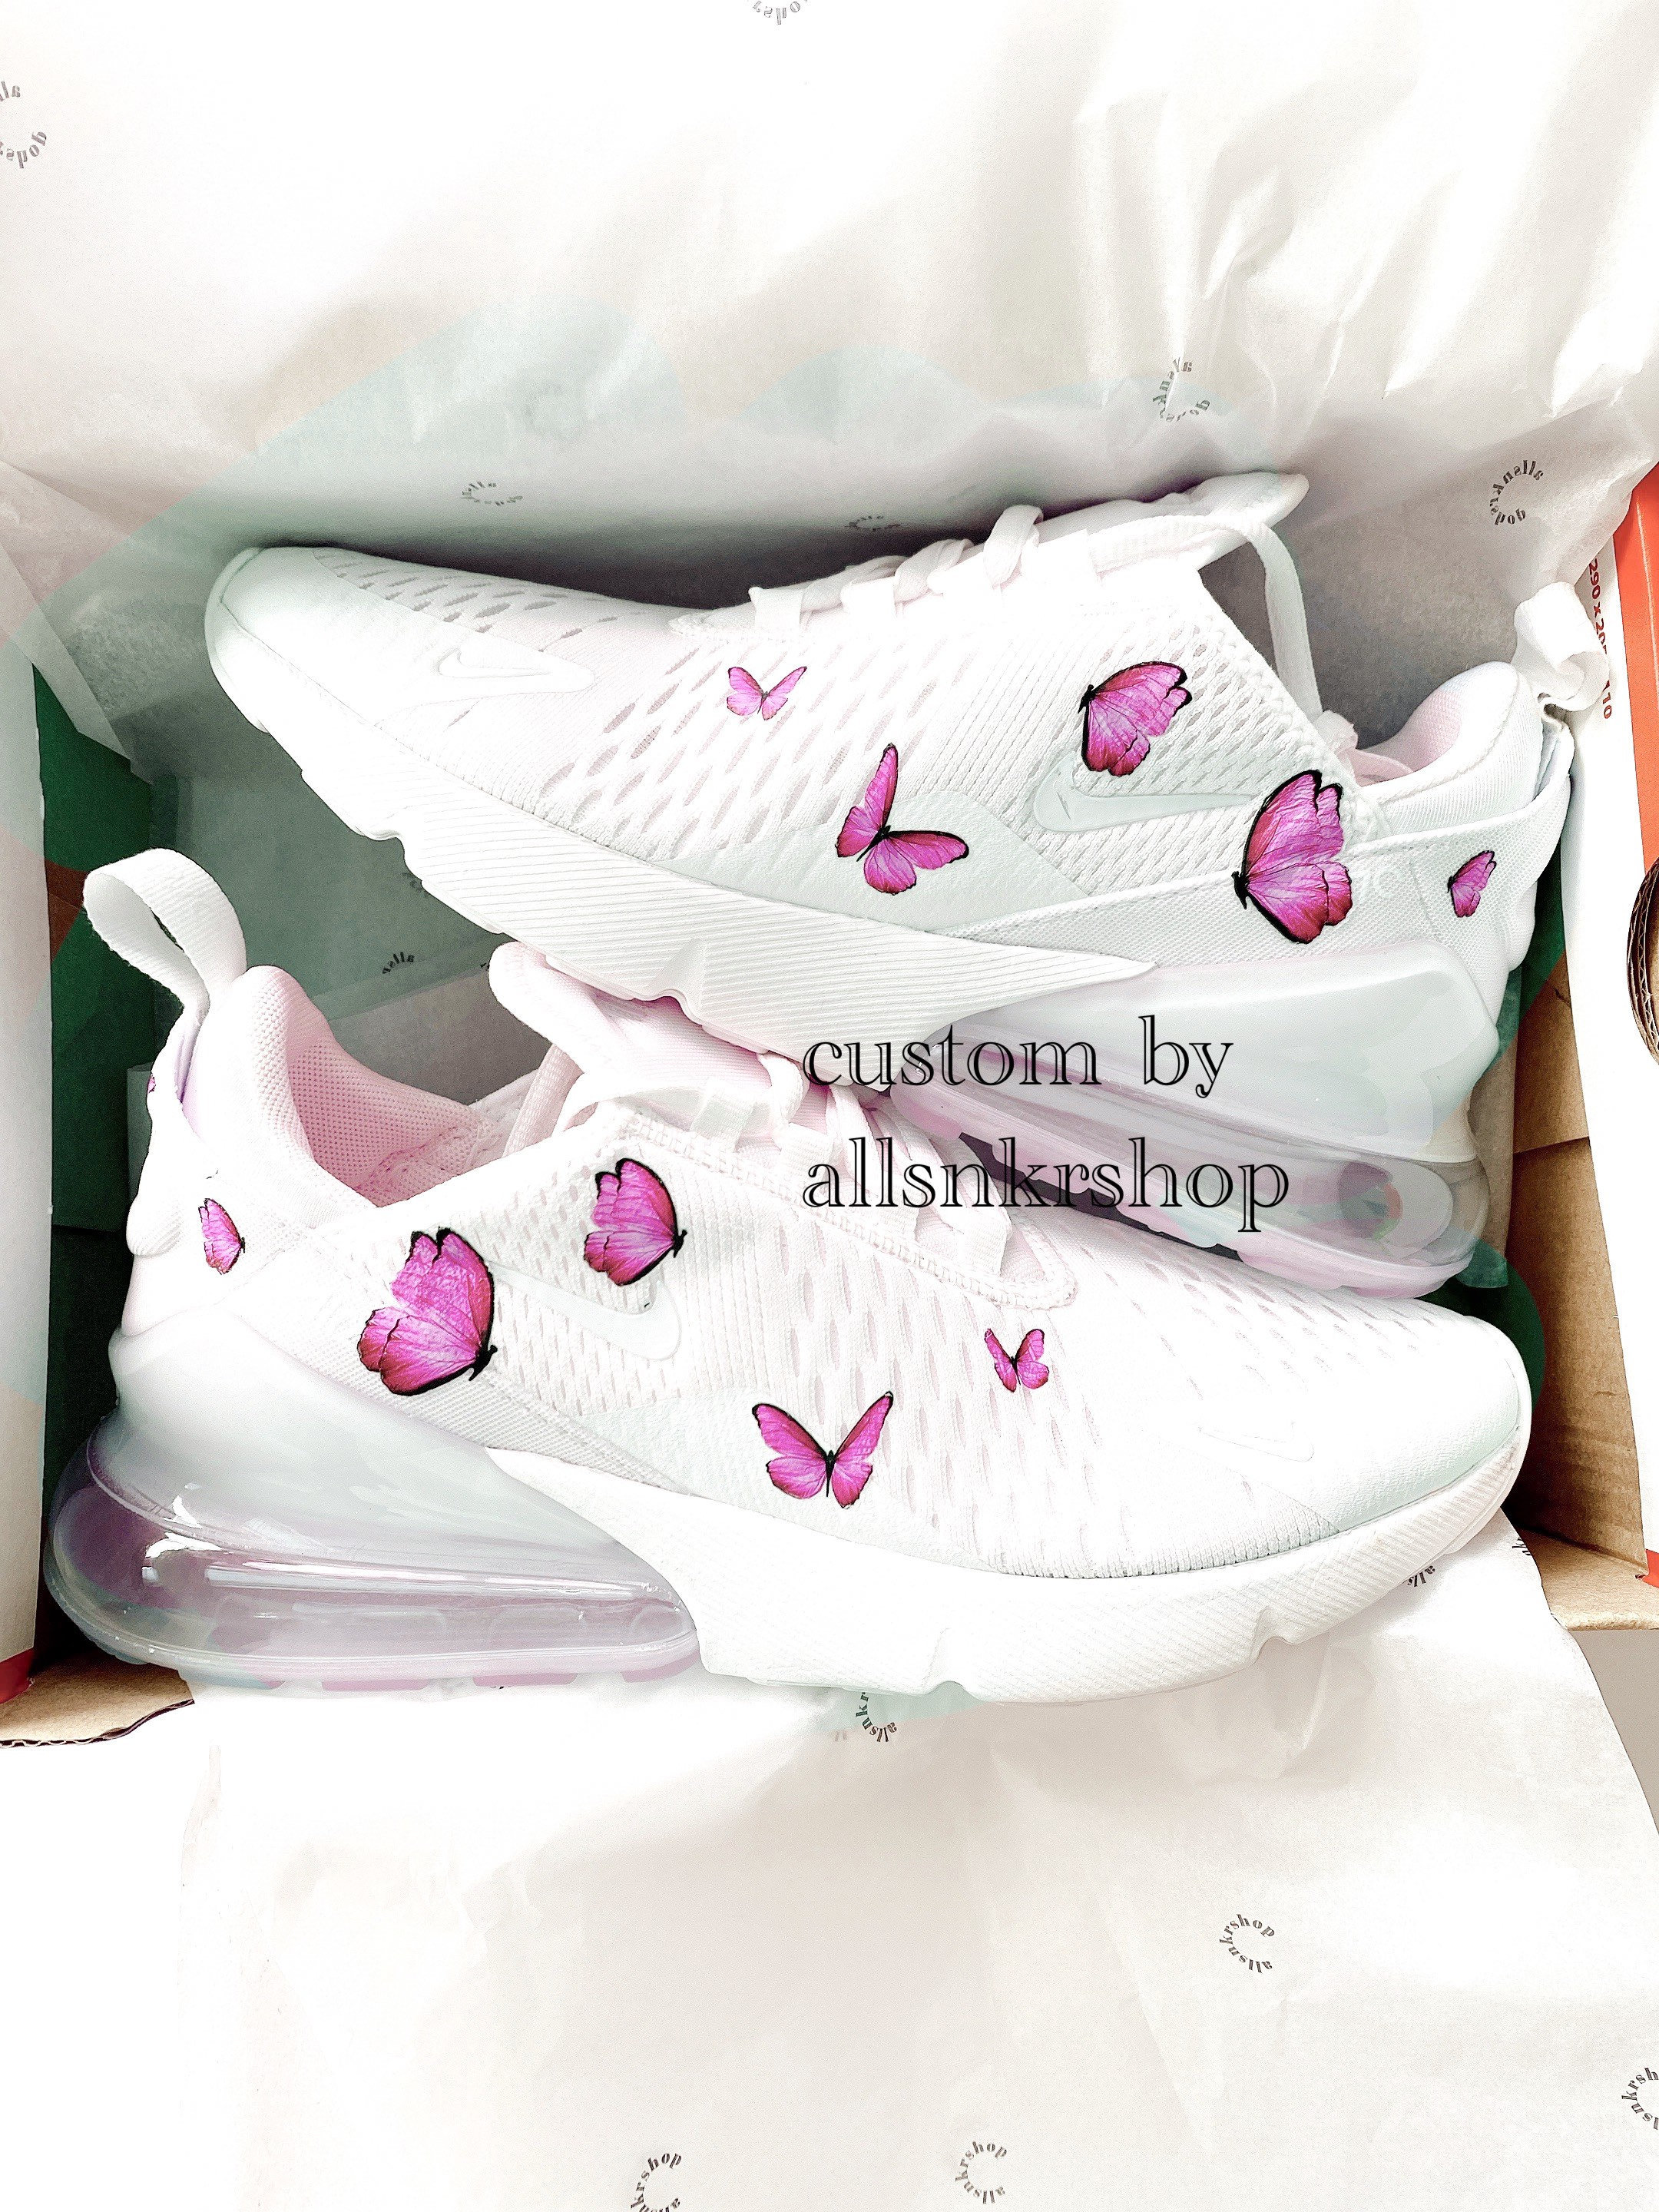 Honger Wissen gracht Nike Air Max 270 With Custom Butterfly Pink - Etsy